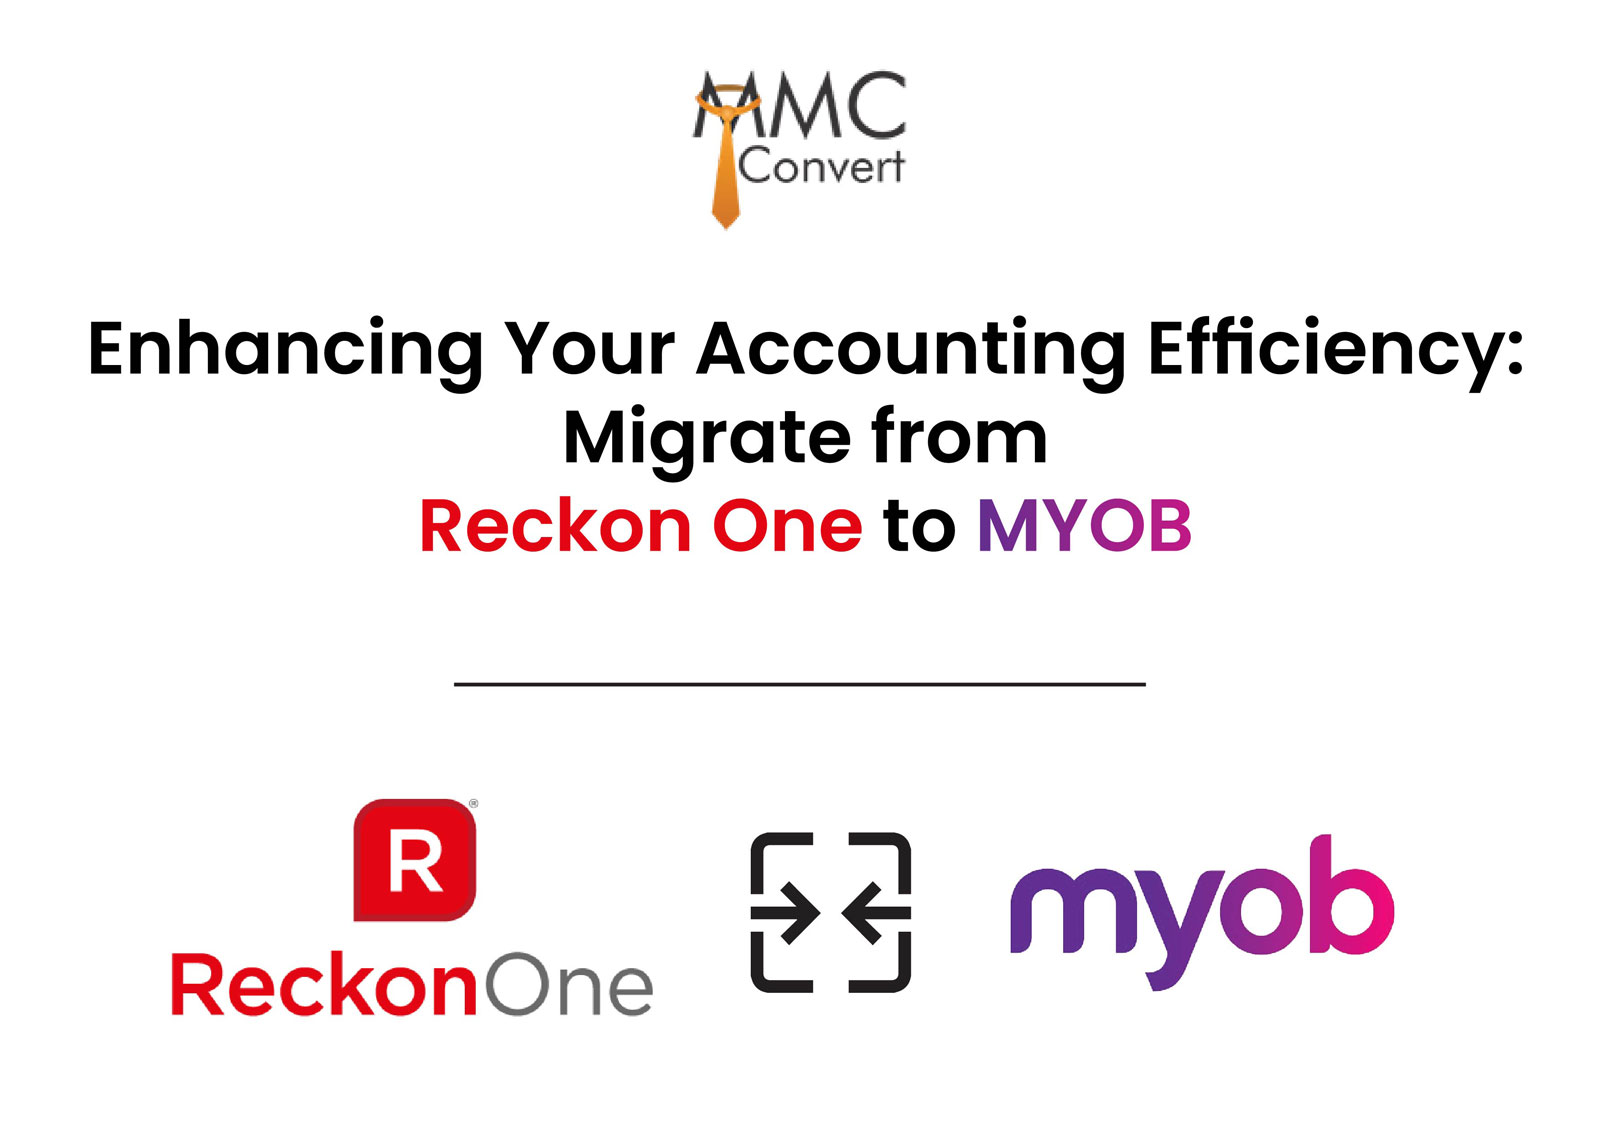 Enhancing Your Accounting Efficiency: Migrate from Reckon One to MYOB